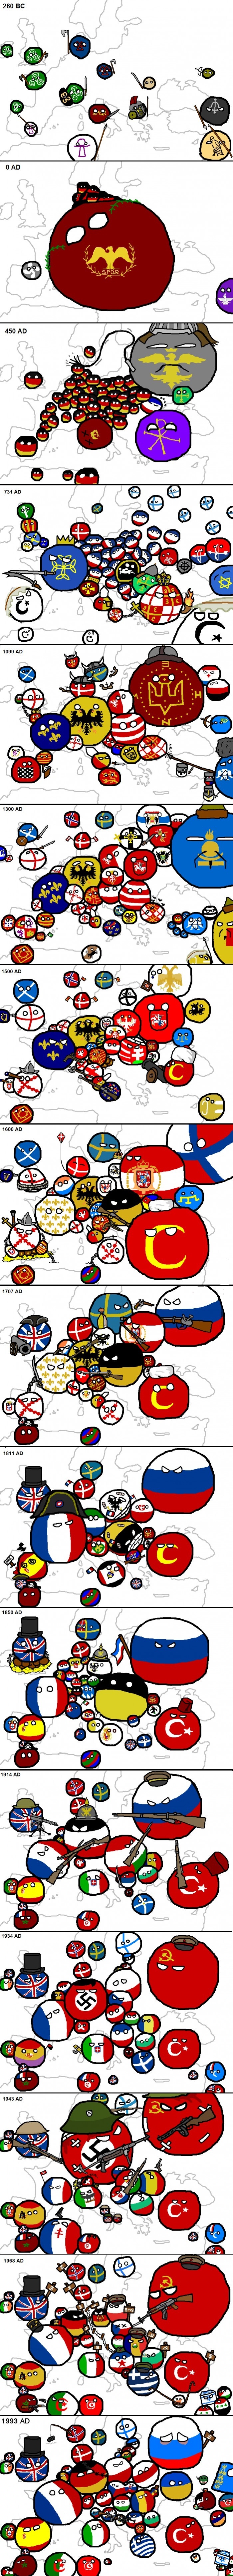 The History of Europe as told through Countryballs